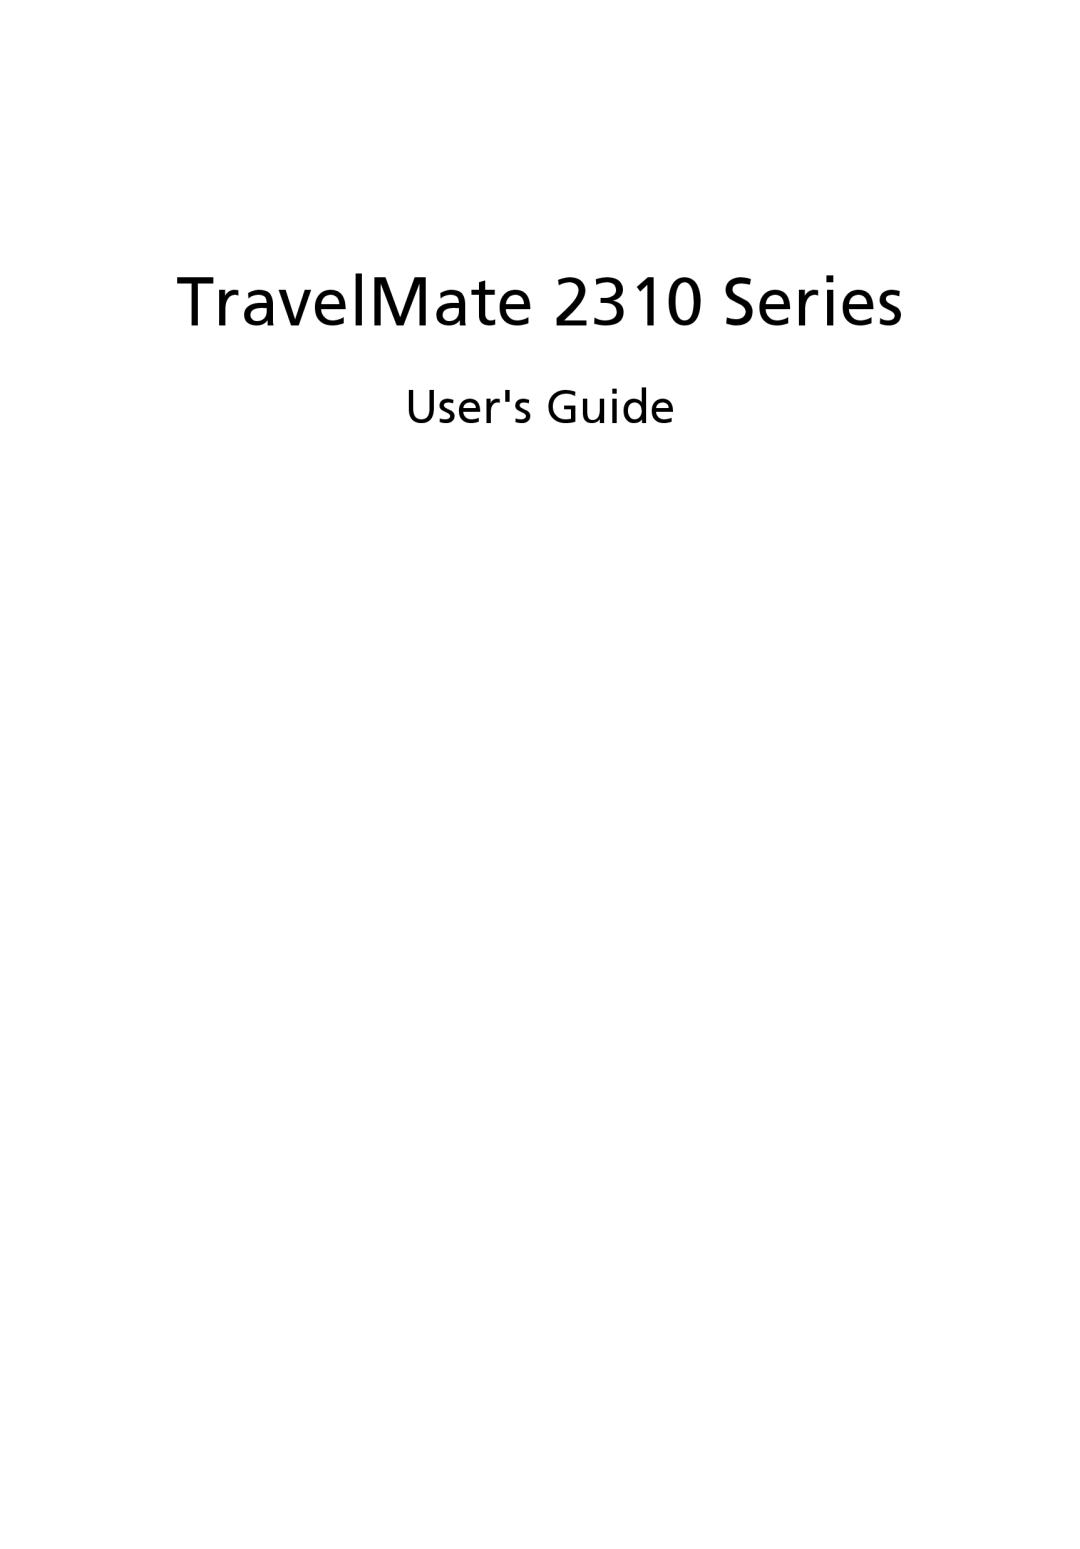 Acer manual Users Guide, TravelMate 2310 Series 